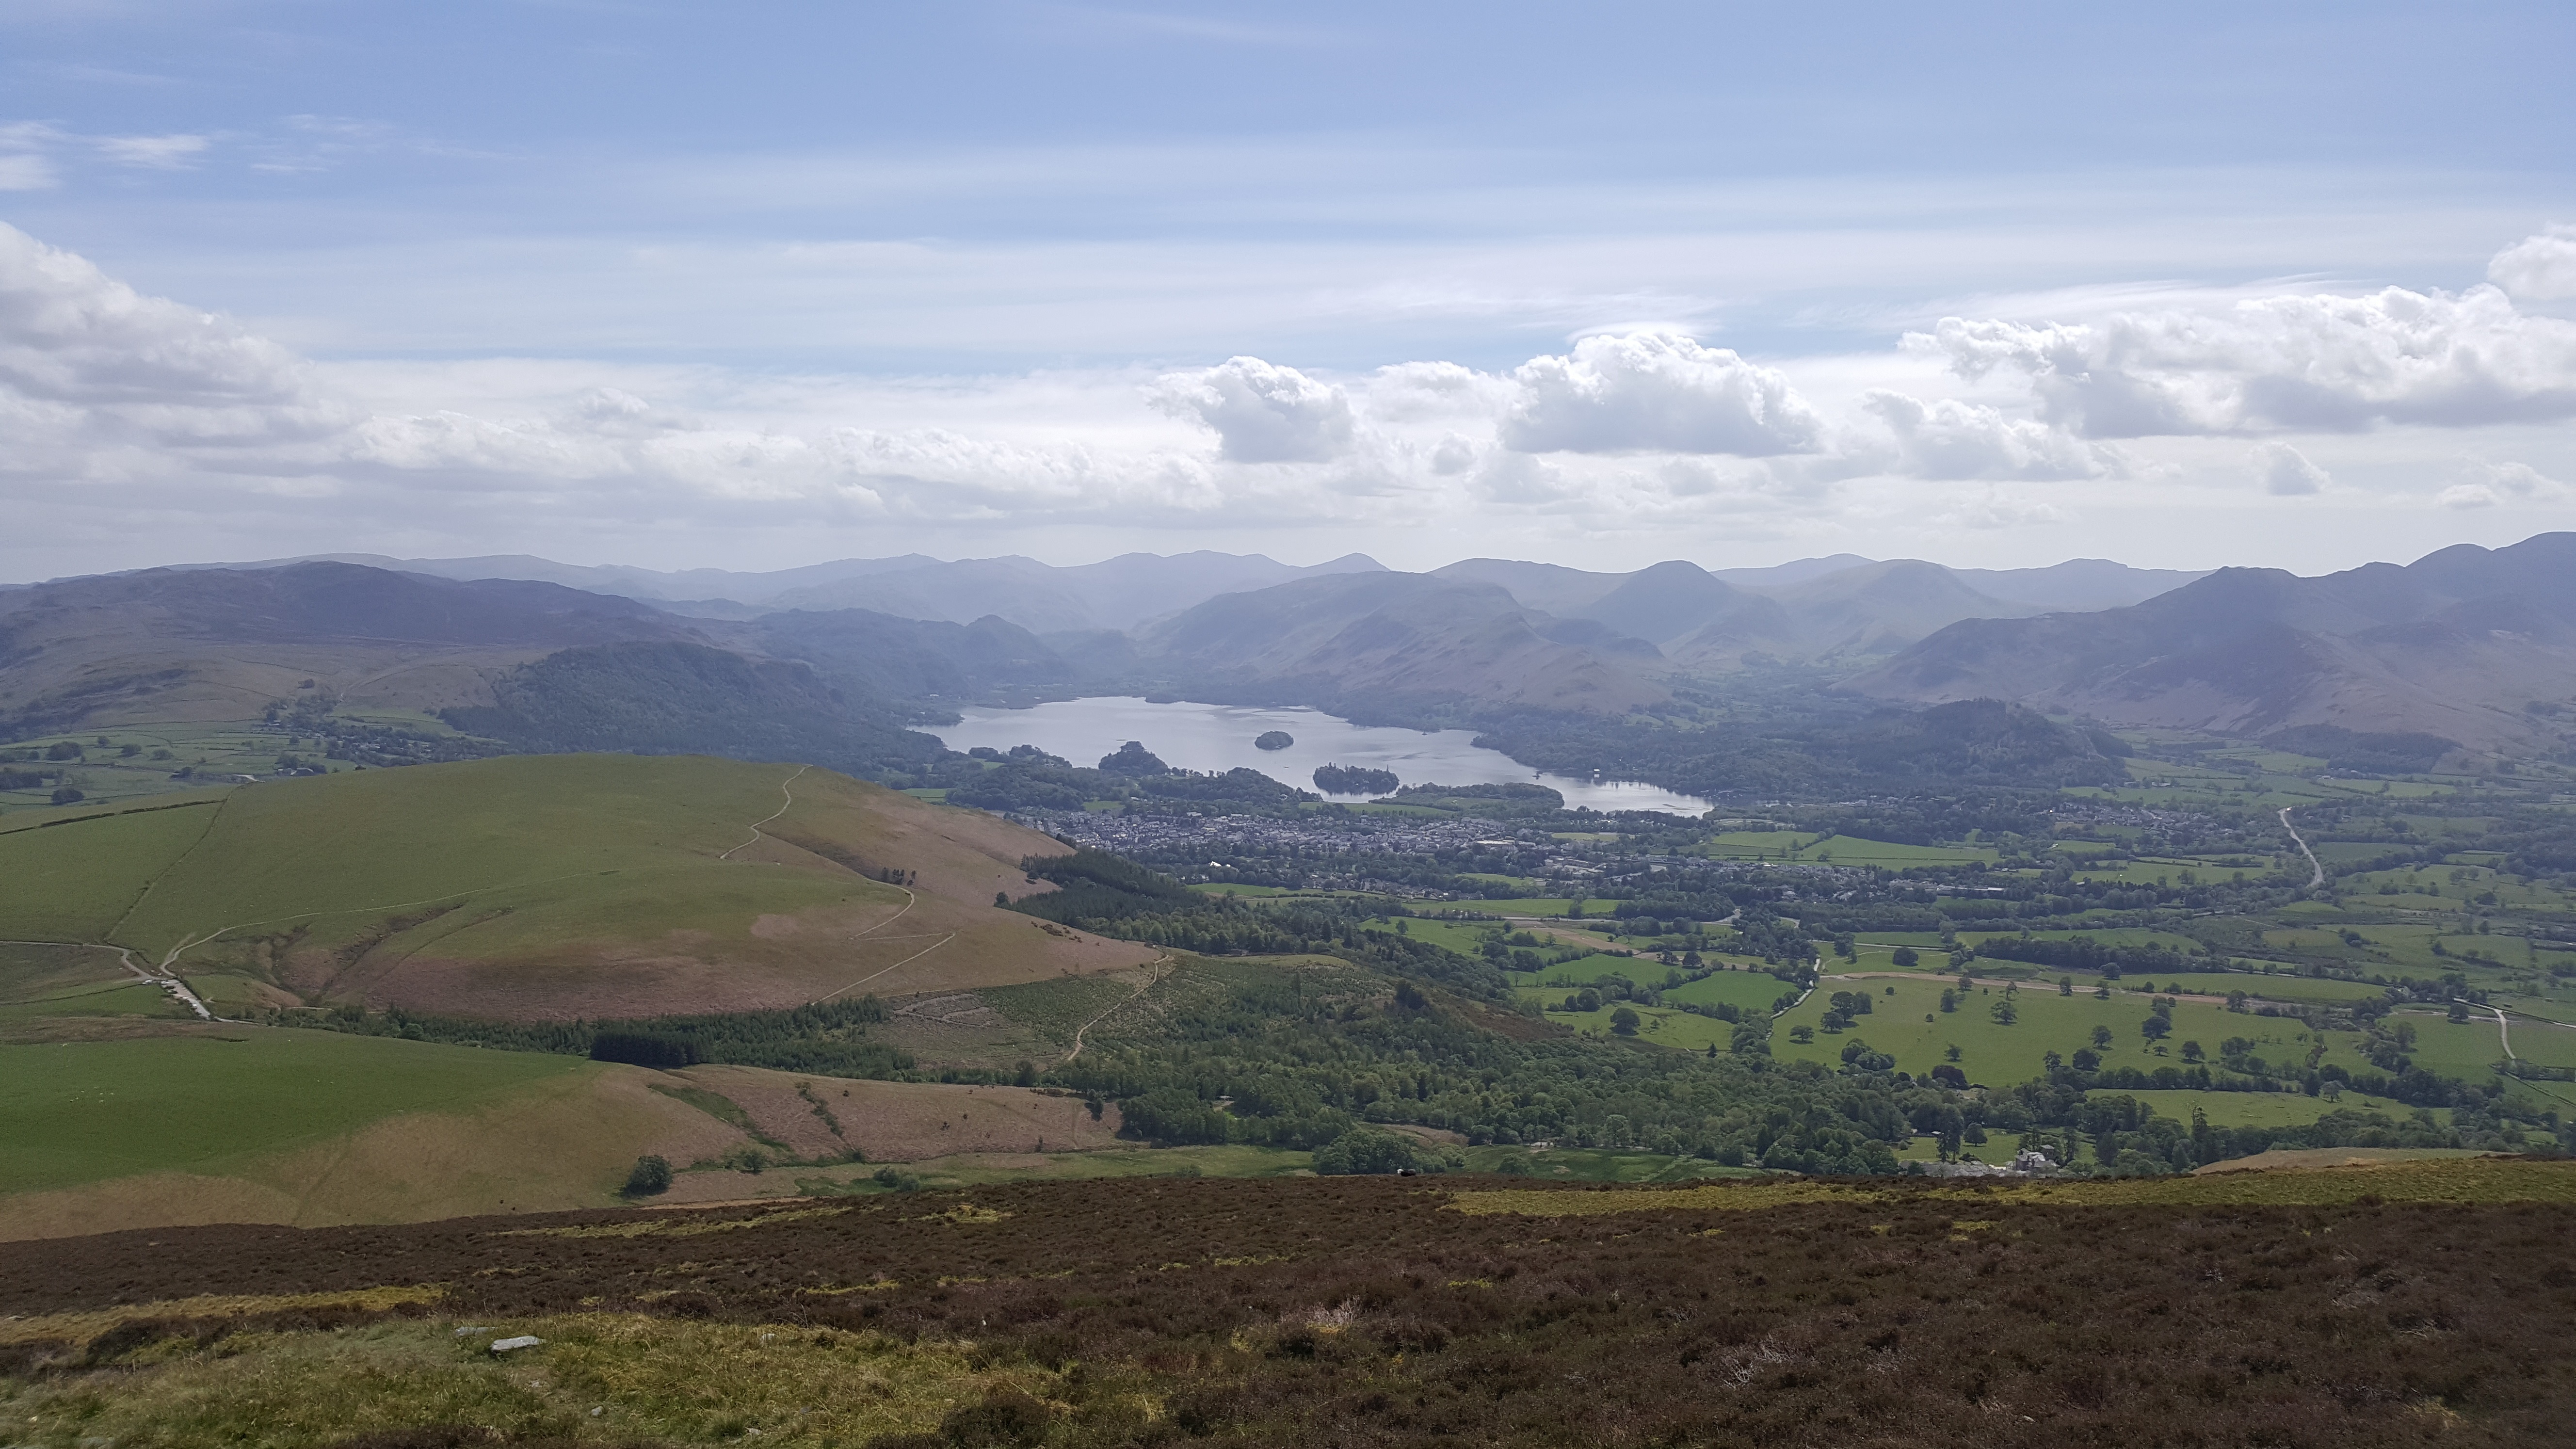 For Day 1 Skiddaw 2 Caption Keswick and Derwent Water from Skiddaw